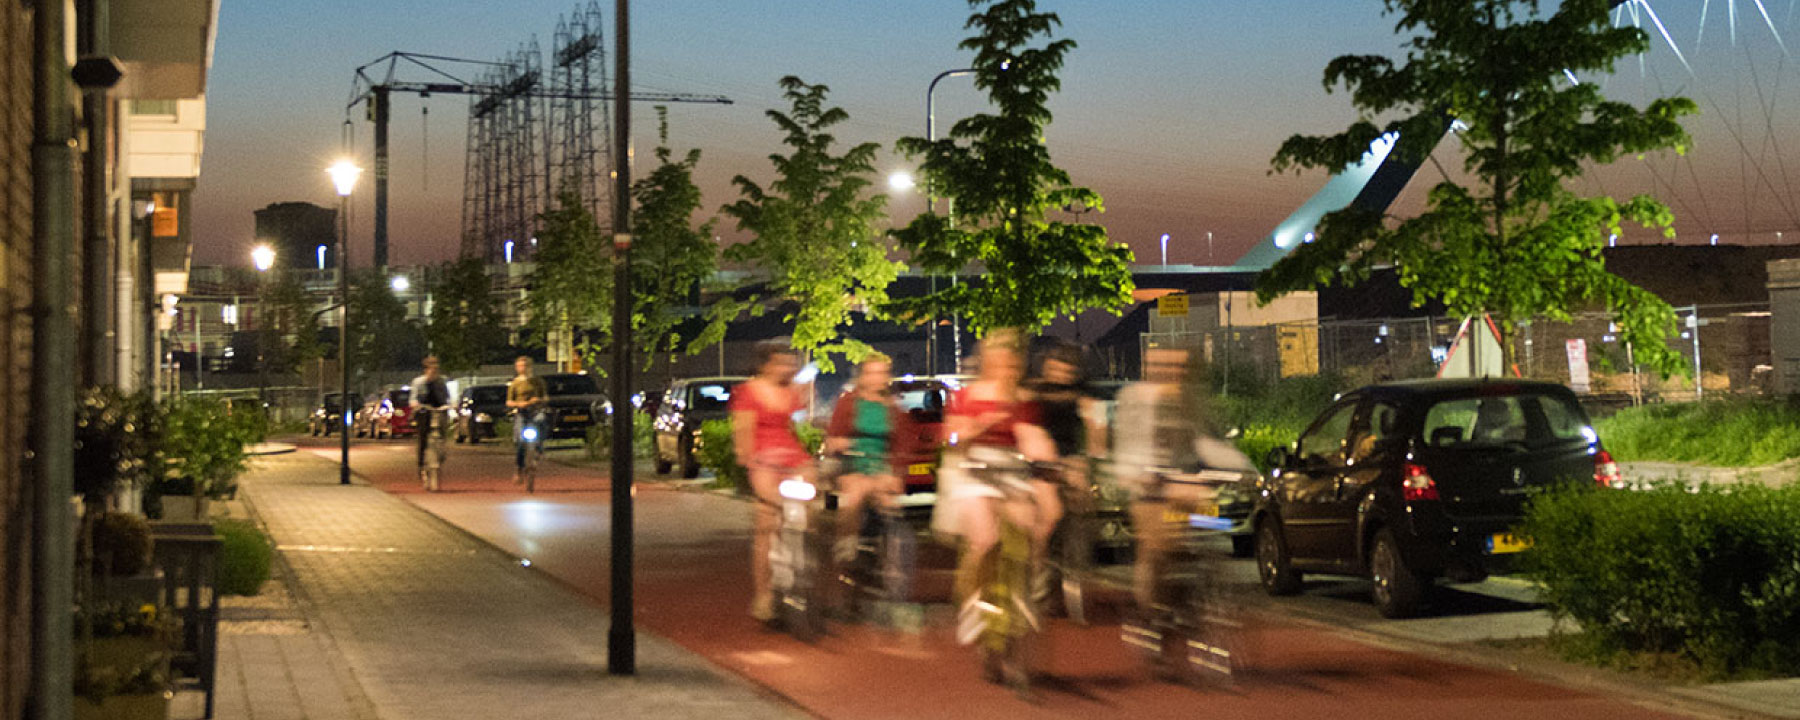 Quality lighting solutions adapt to usage patterns of the public realm after dark